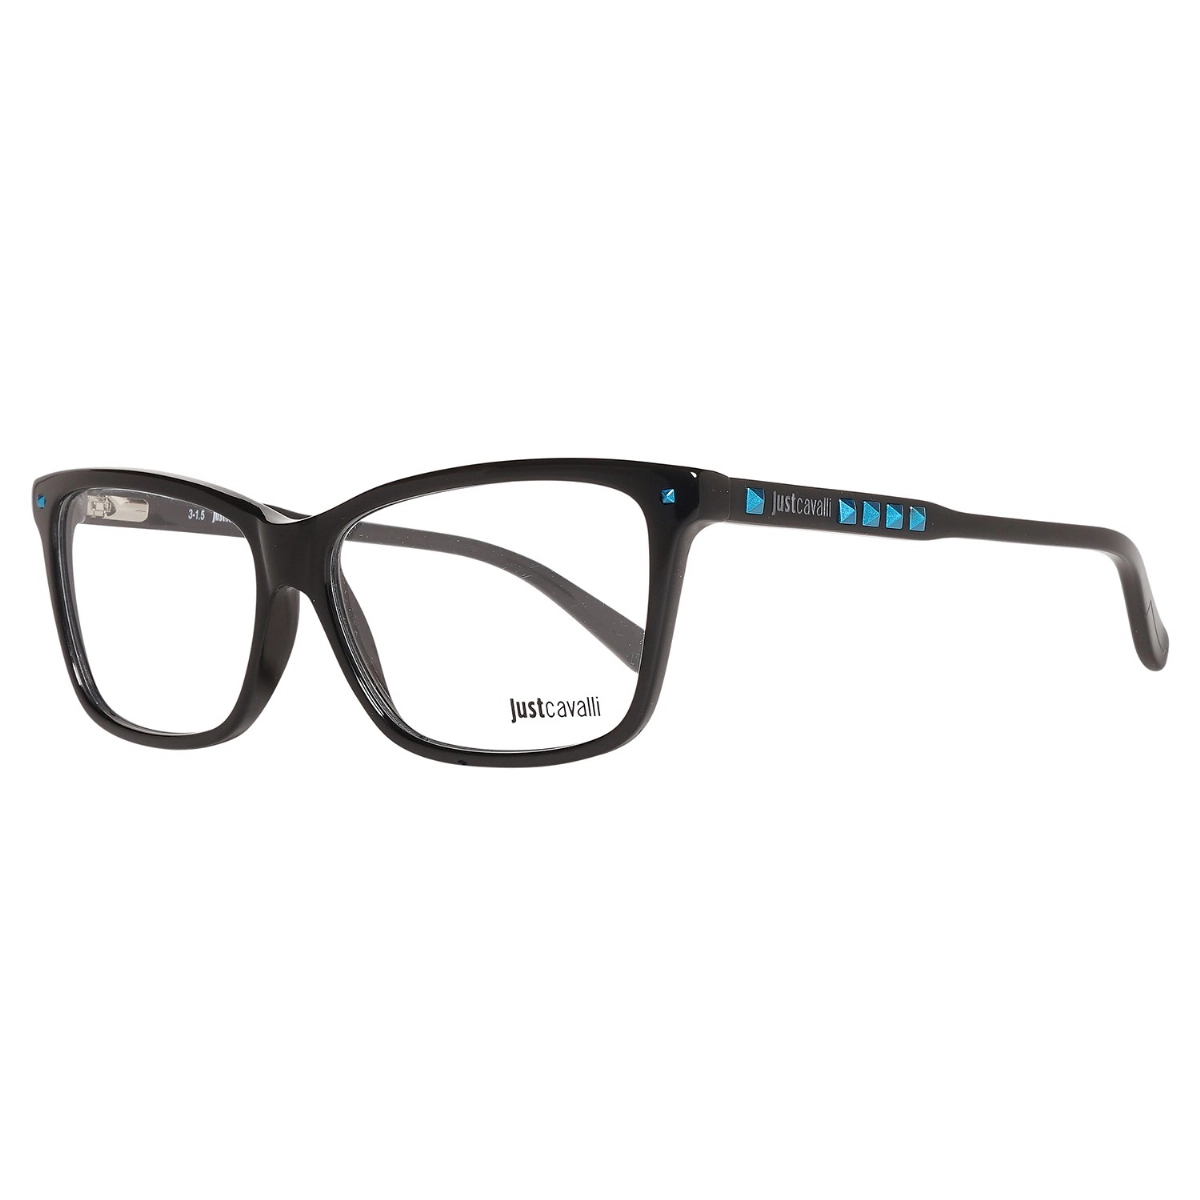 GLASSES FOR WOMAN JUST CAVALLI JC0624-001-54